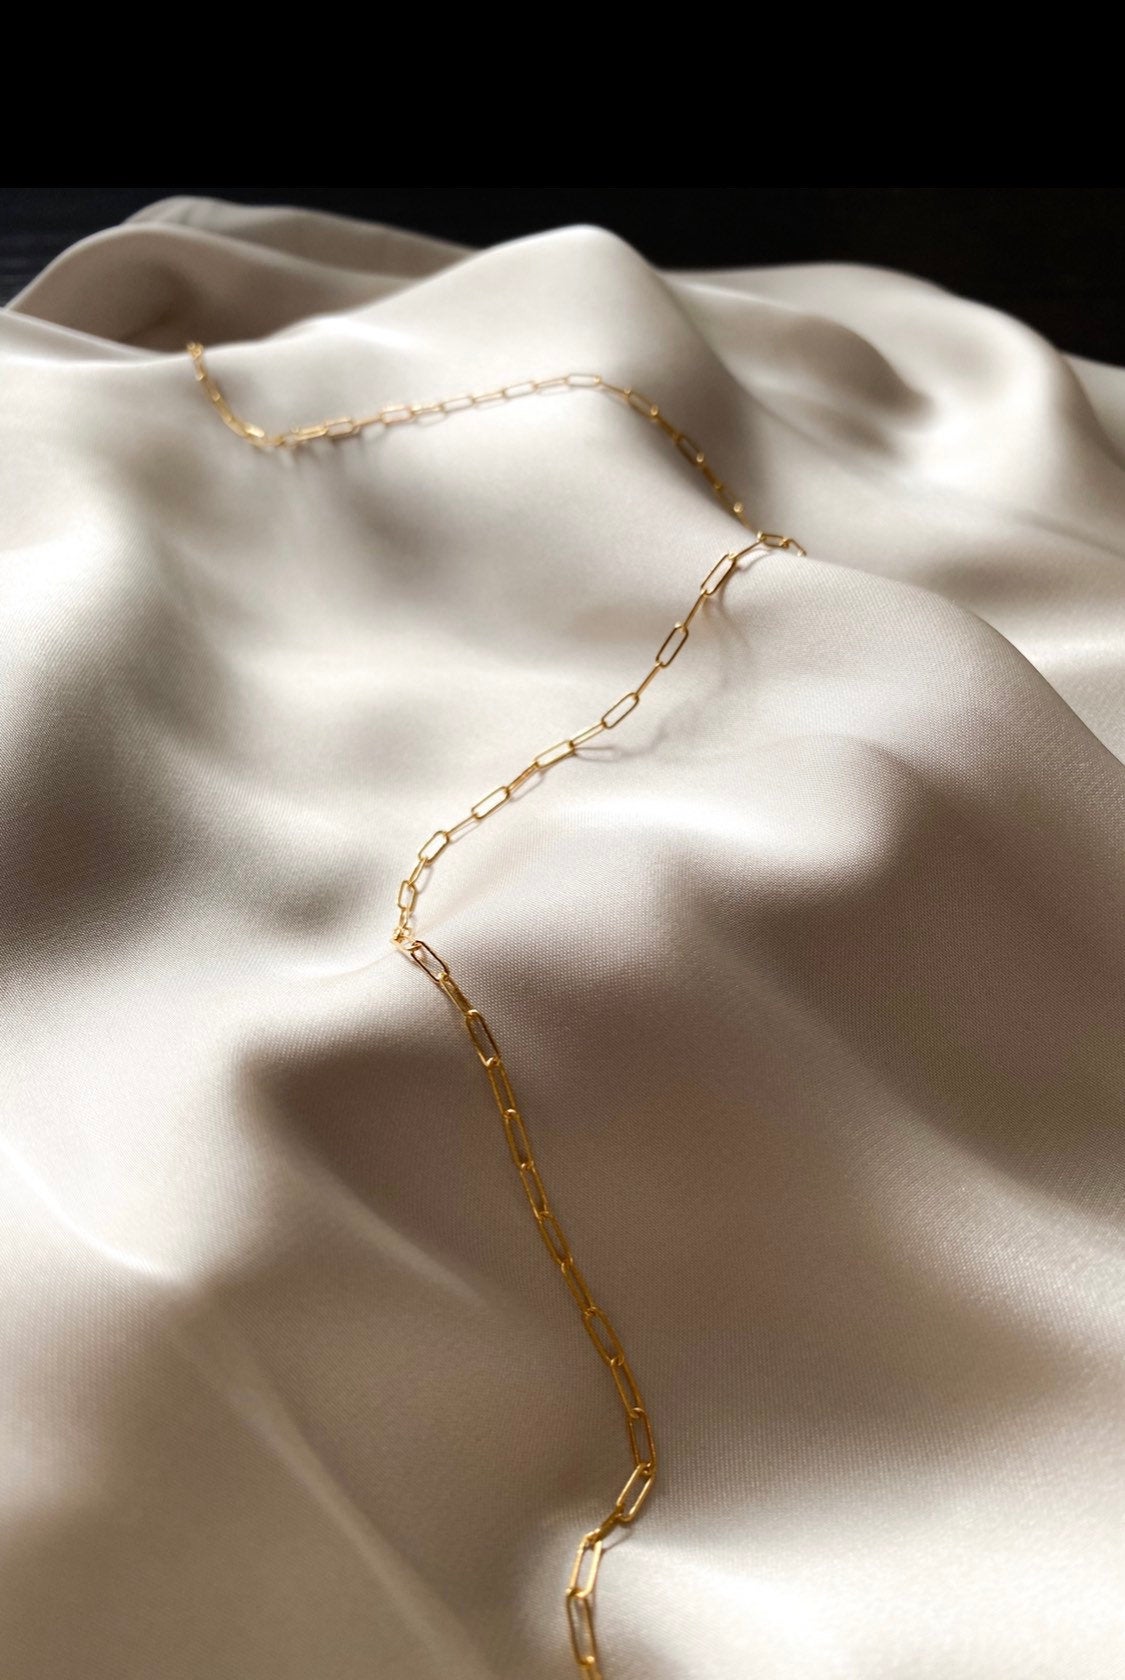 Gold fill staple chain necklace - choker or standard length necklace - High quality tarnish free - Gold chain  - layering necklace